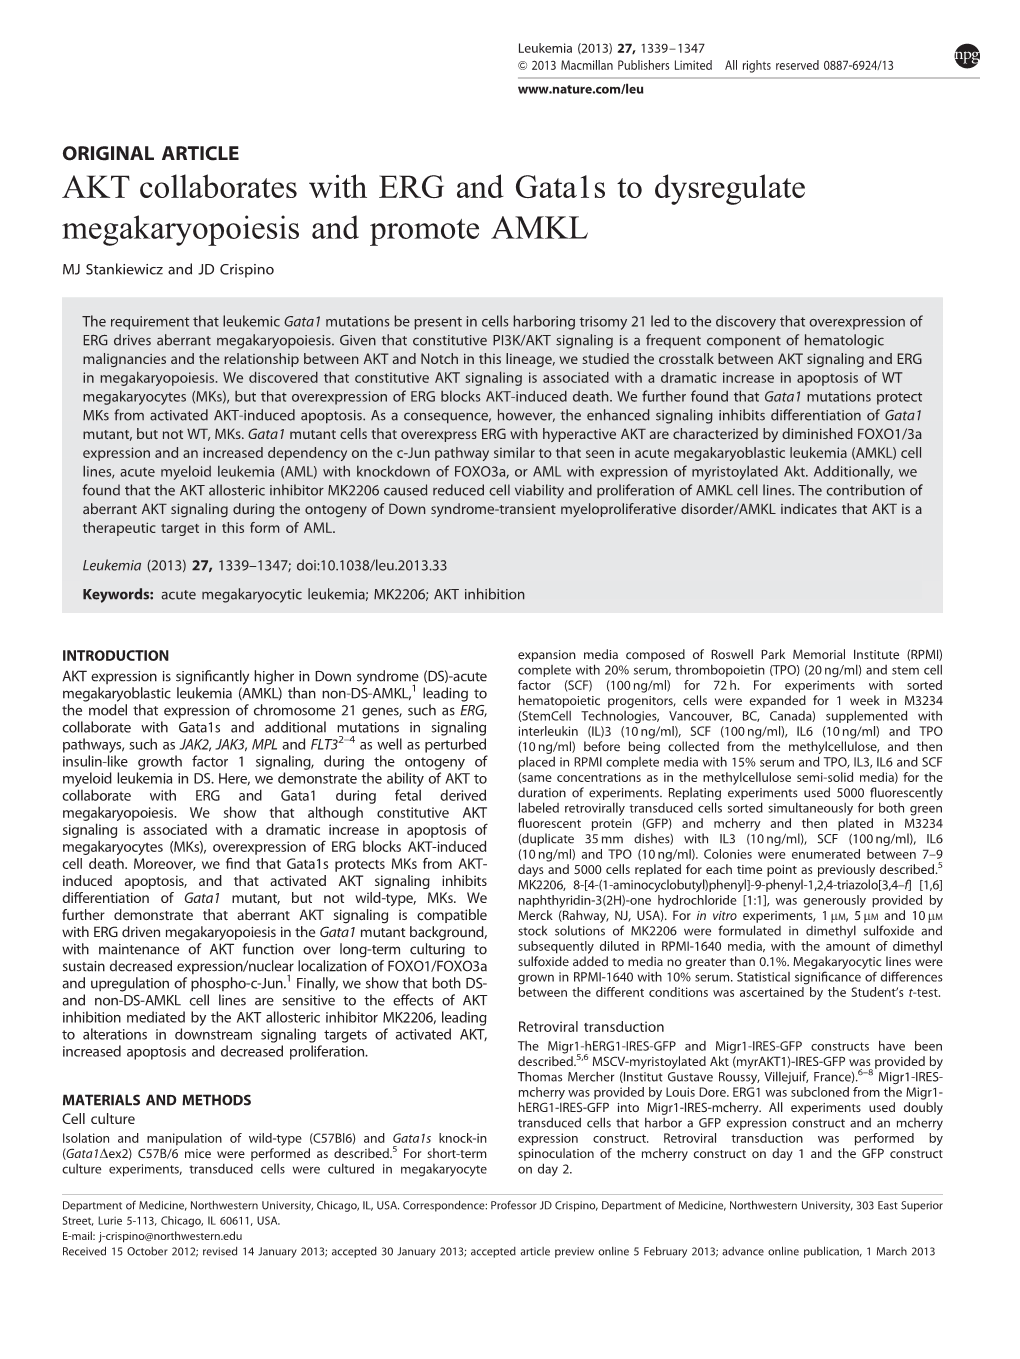 AKT Collaborates with ERG and Gata1s to Dysregulate Megakaryopoiesis and Promote AMKL